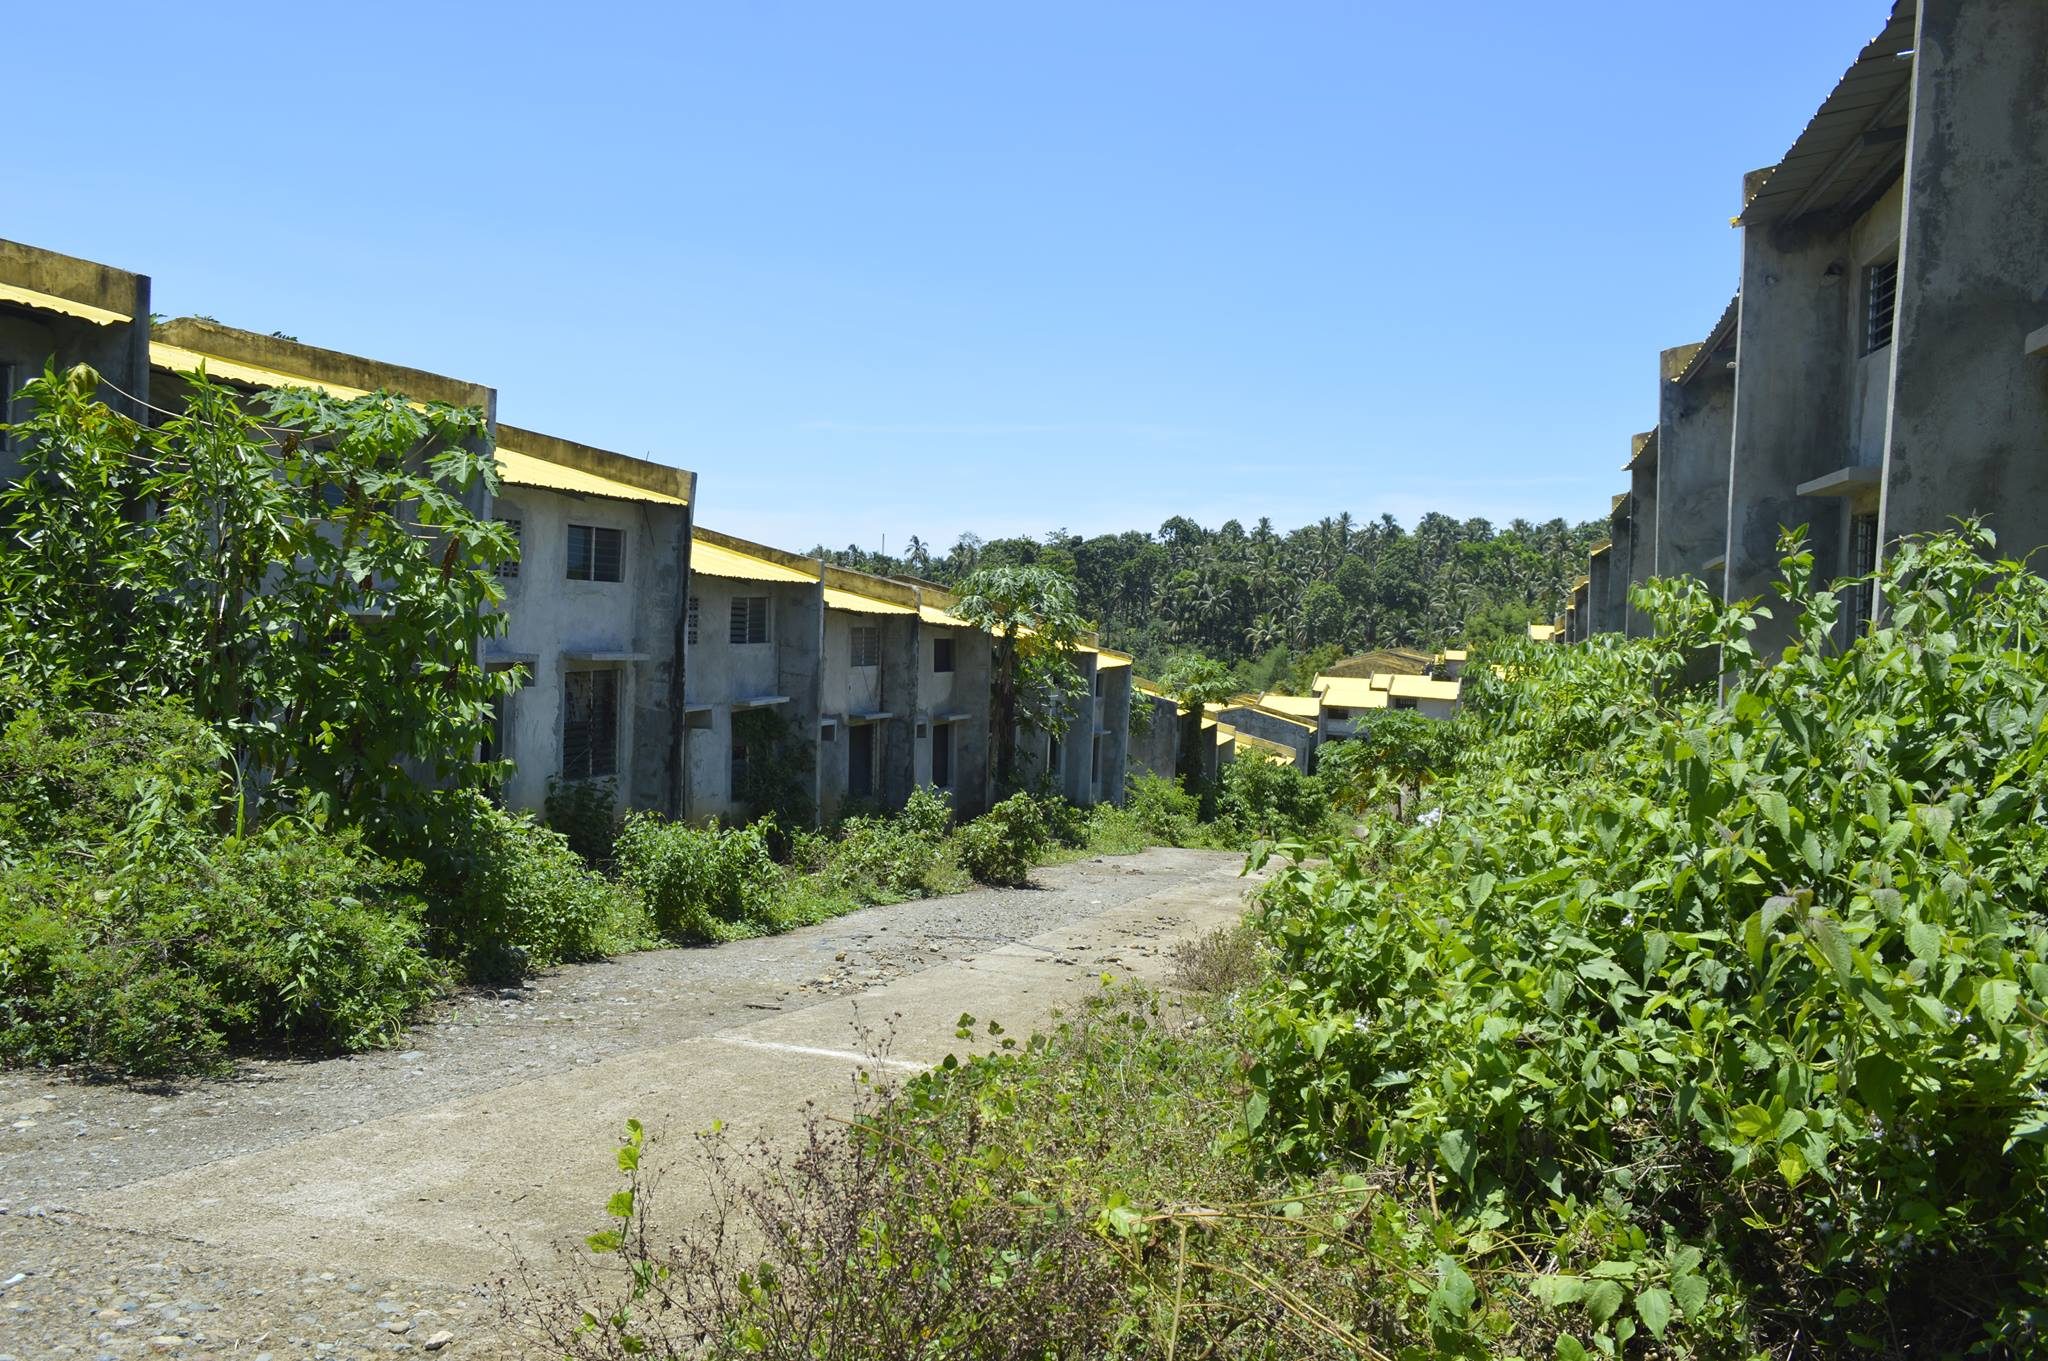 Will anyone live in these NHA housing units in Pagadian?